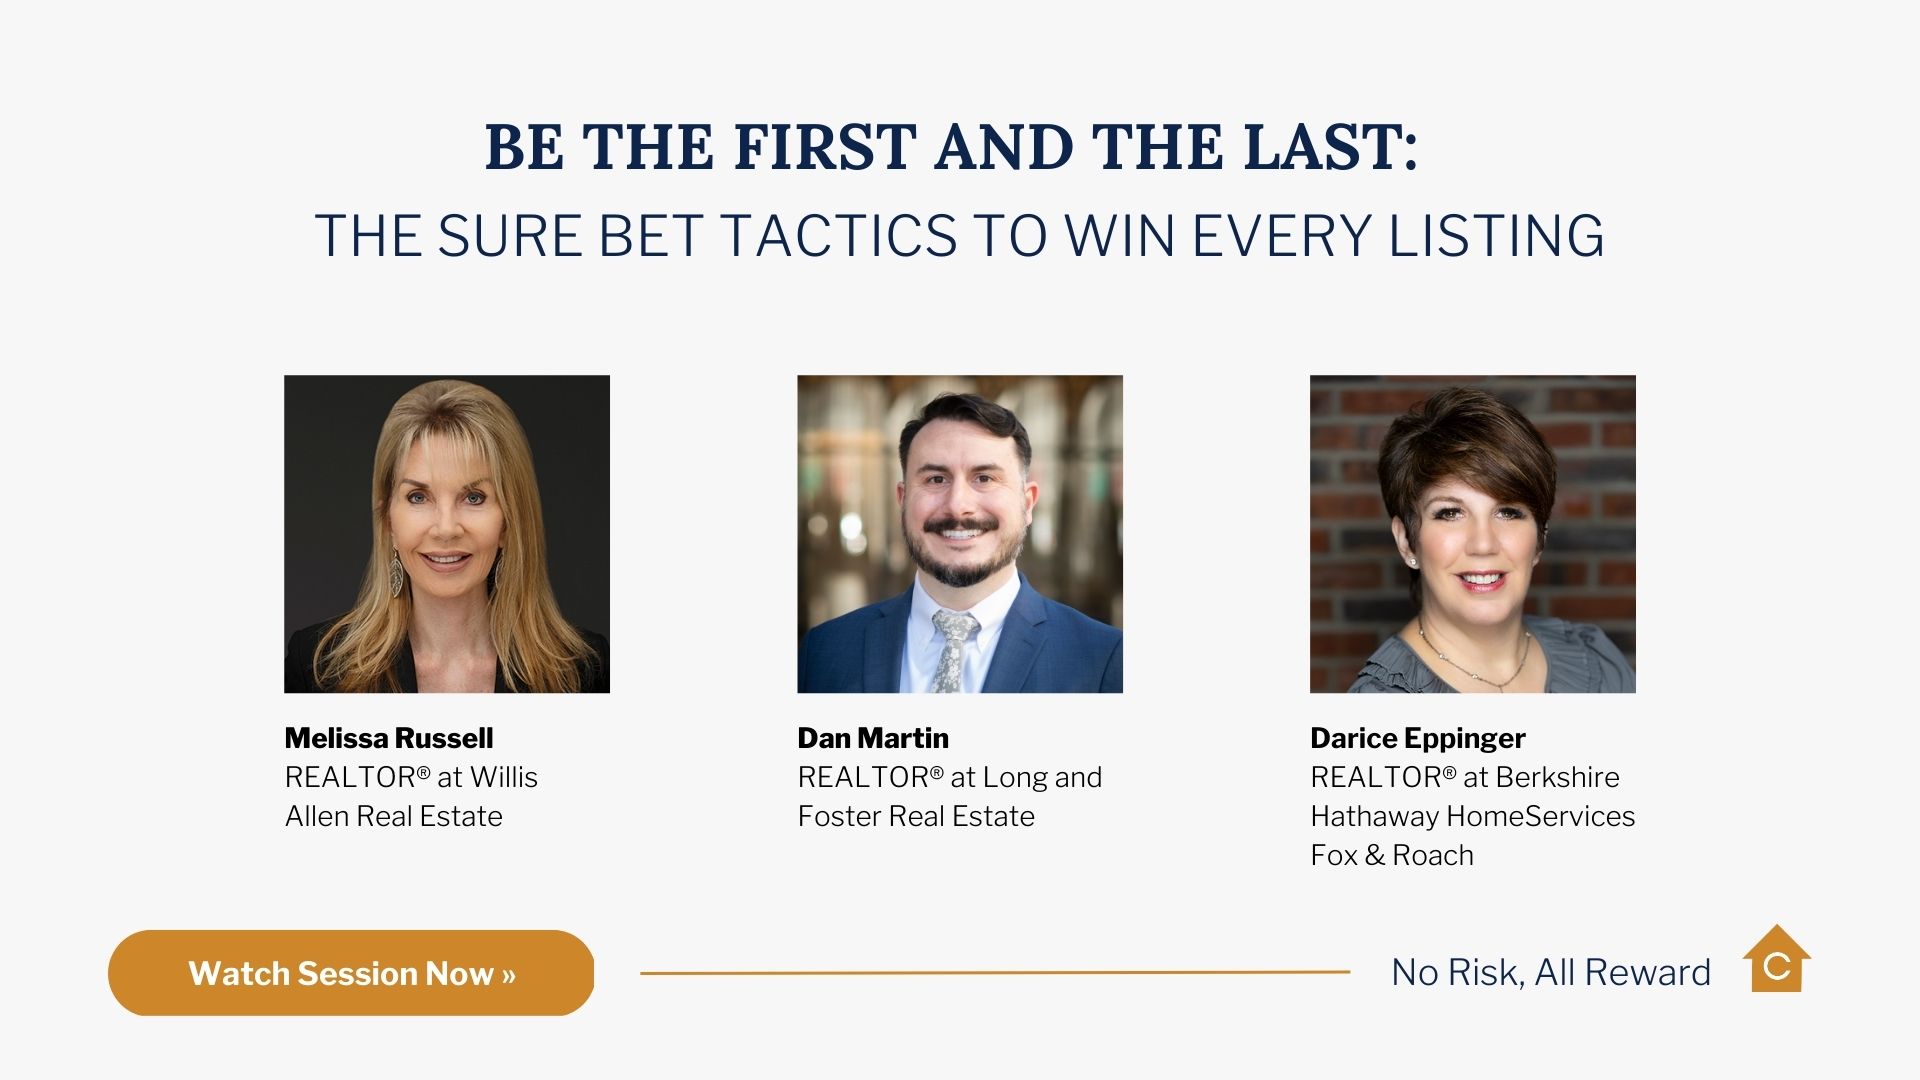 Be The First and The Last: The Sure Bet Tactics to Win Every Listing